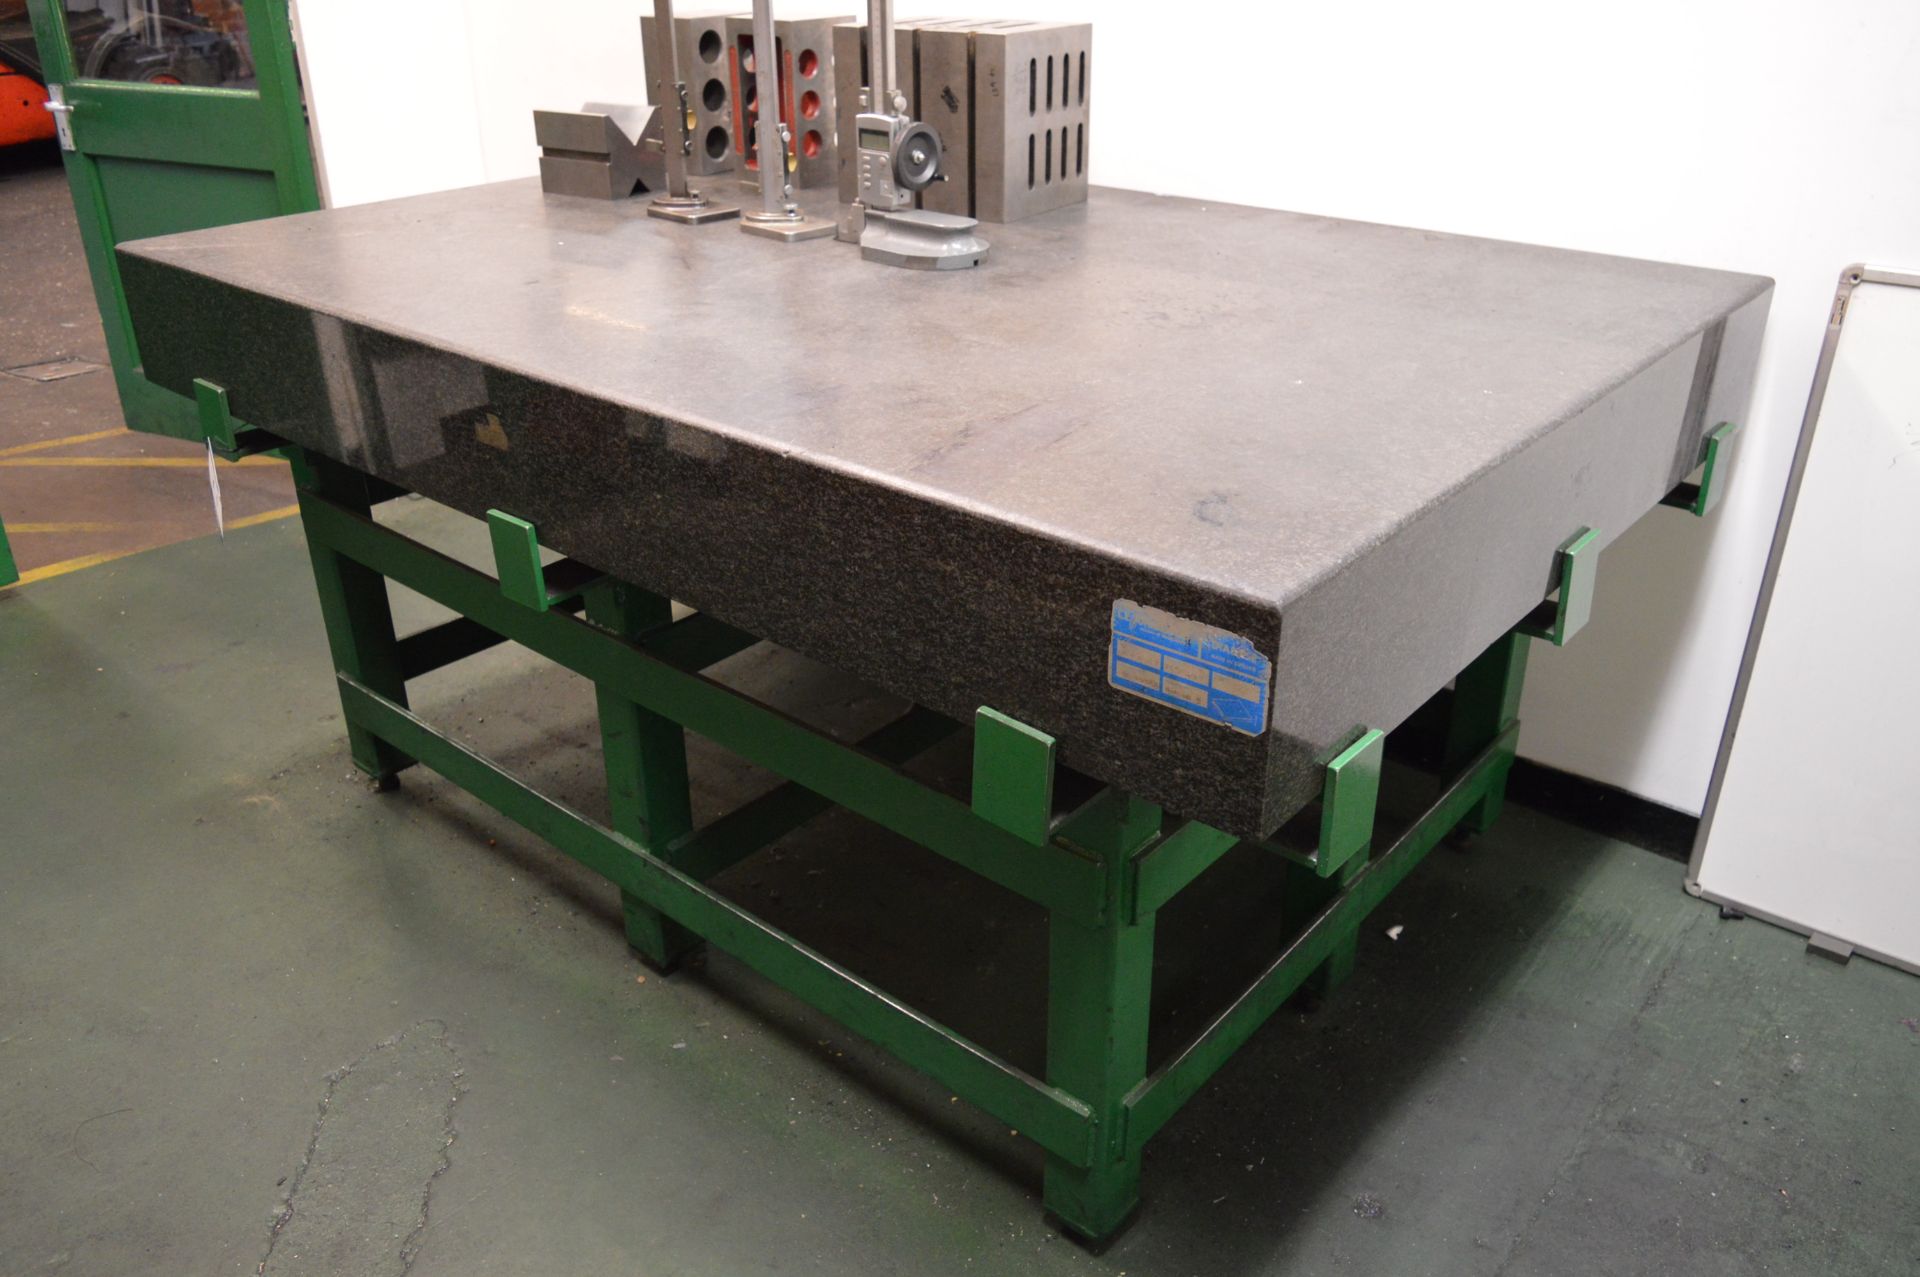 Diabase, Grade 1 granite inspection table (1987) (contents not included) Size: 1.84m x 1.22m - Image 2 of 3